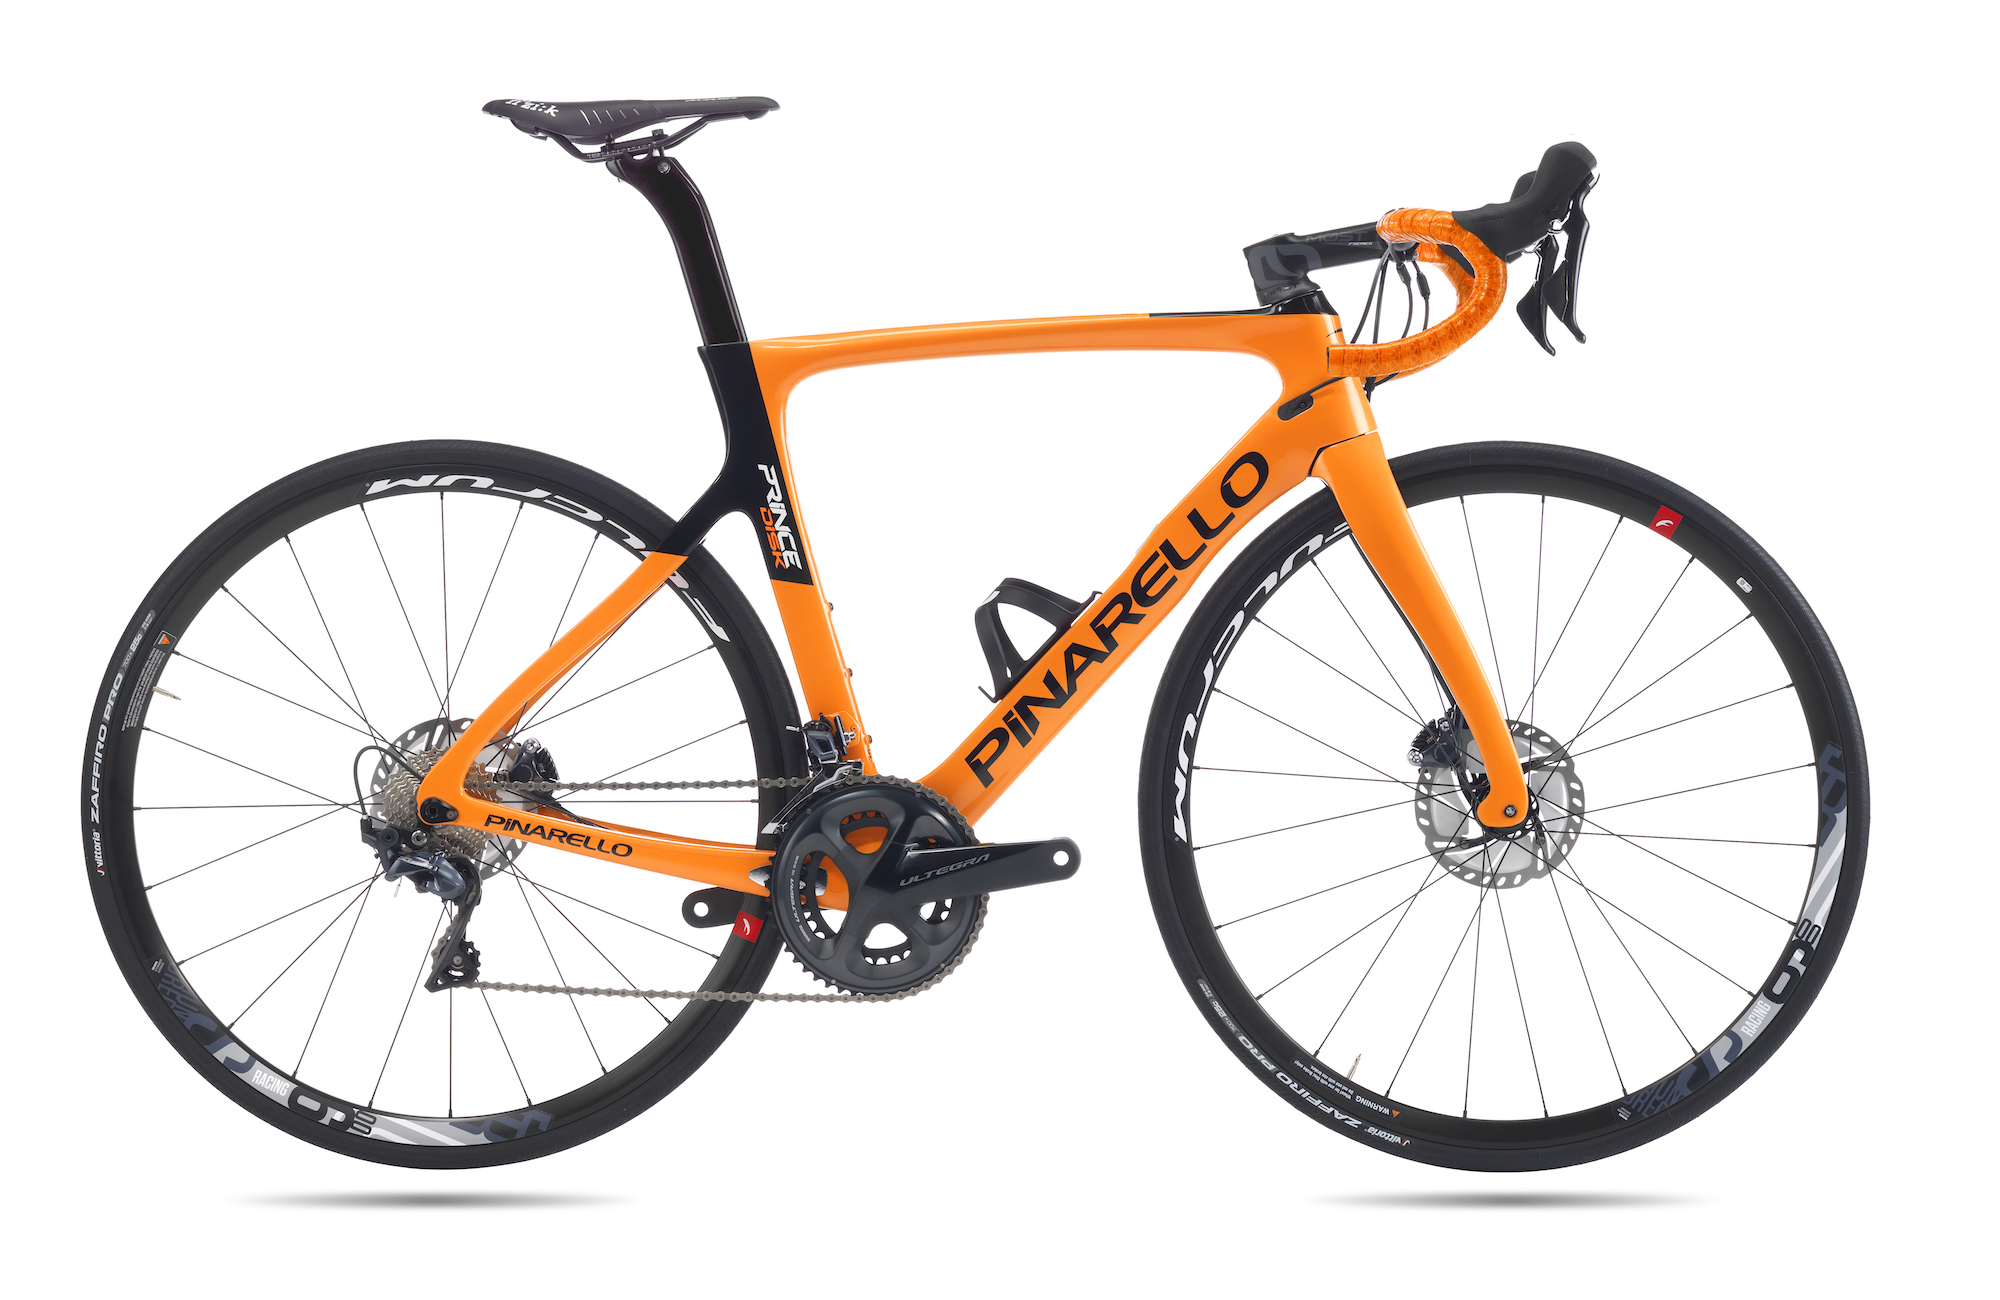 UPDATED Pinarello launches allnew Prince. New affordable model is